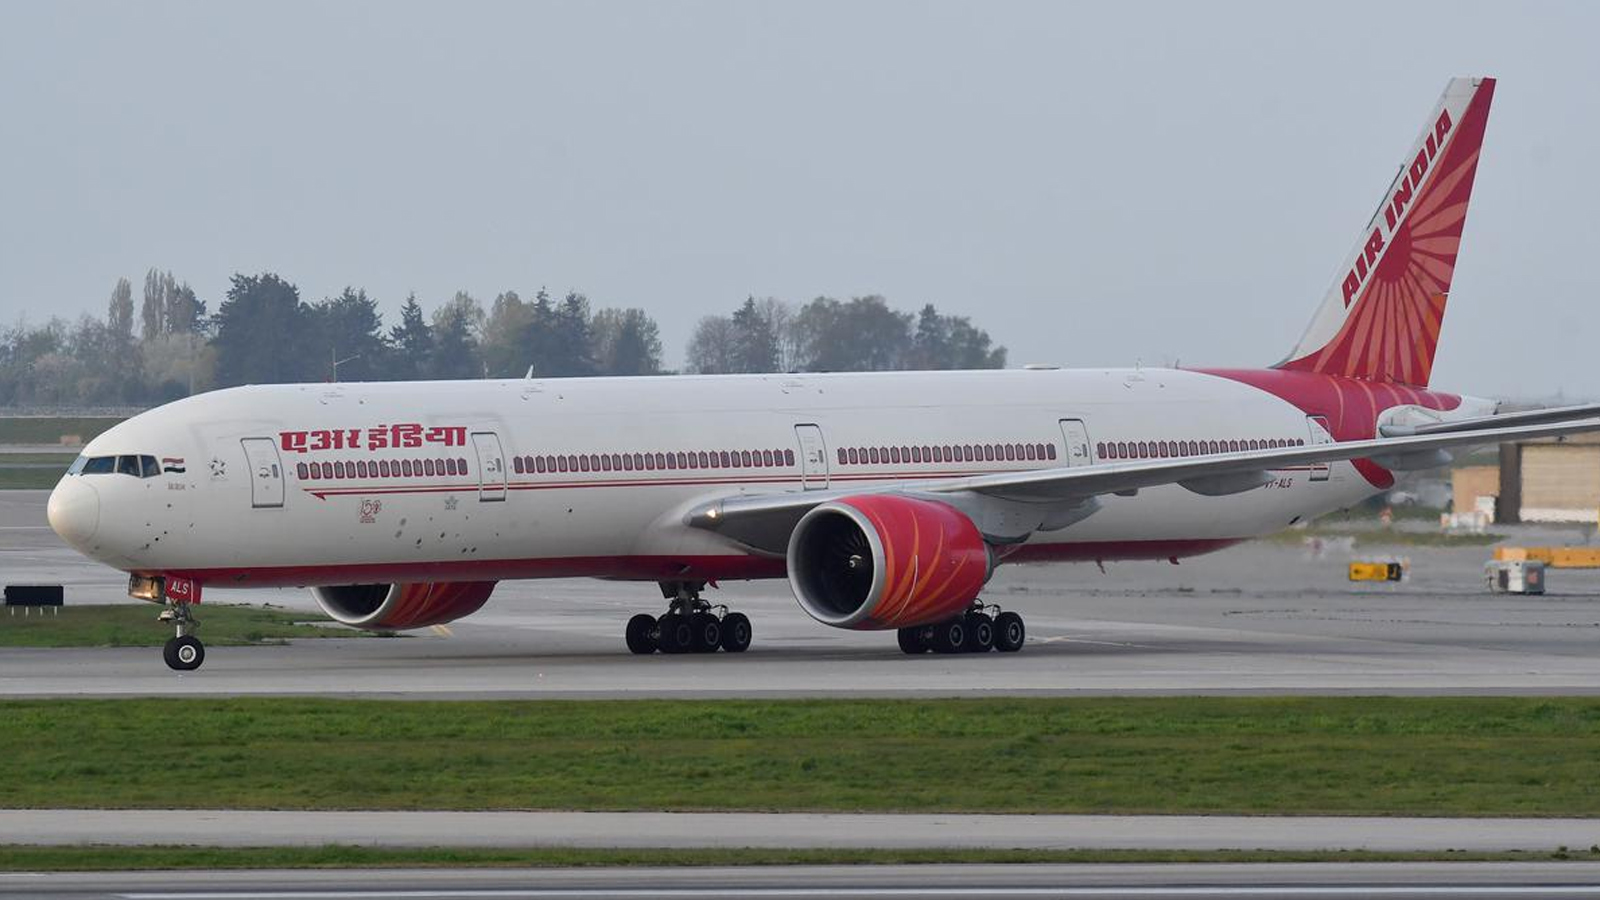 Embarrassing act in Air India